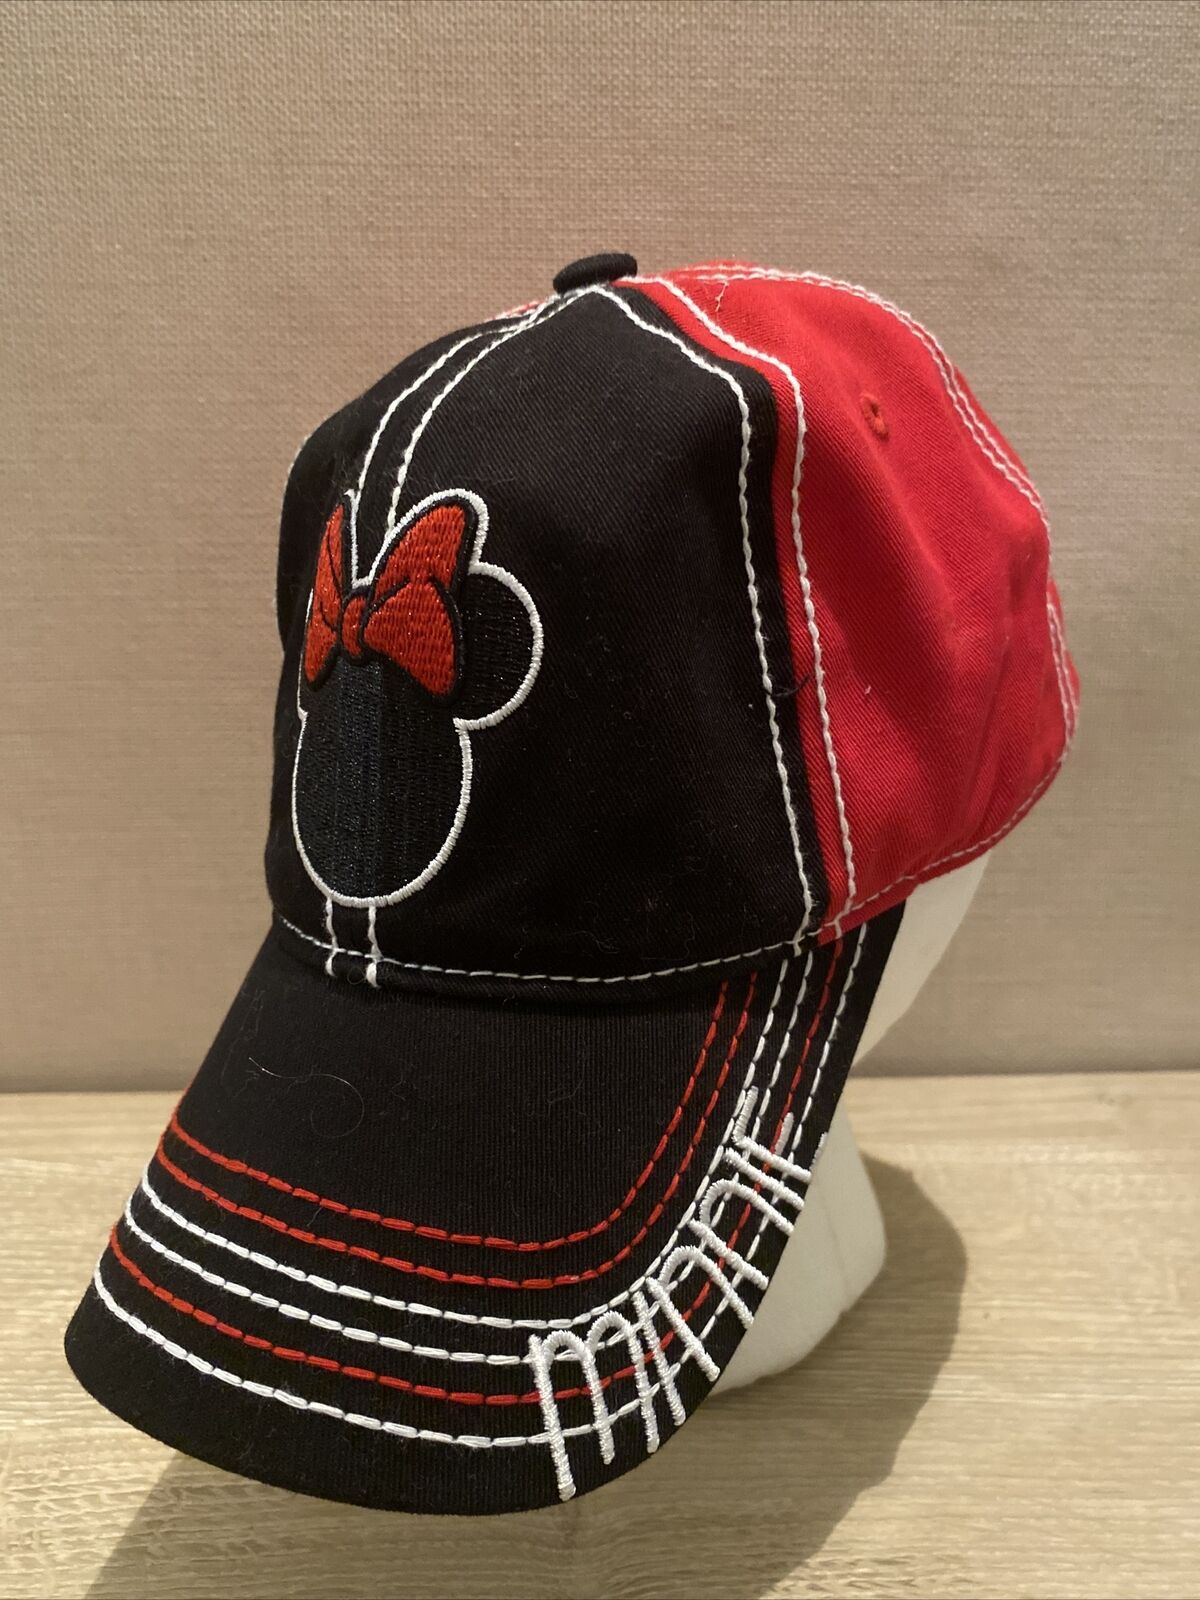 New Minnie Mouse Hat Disney Baseball Cap Black And Red Adjustable One Size